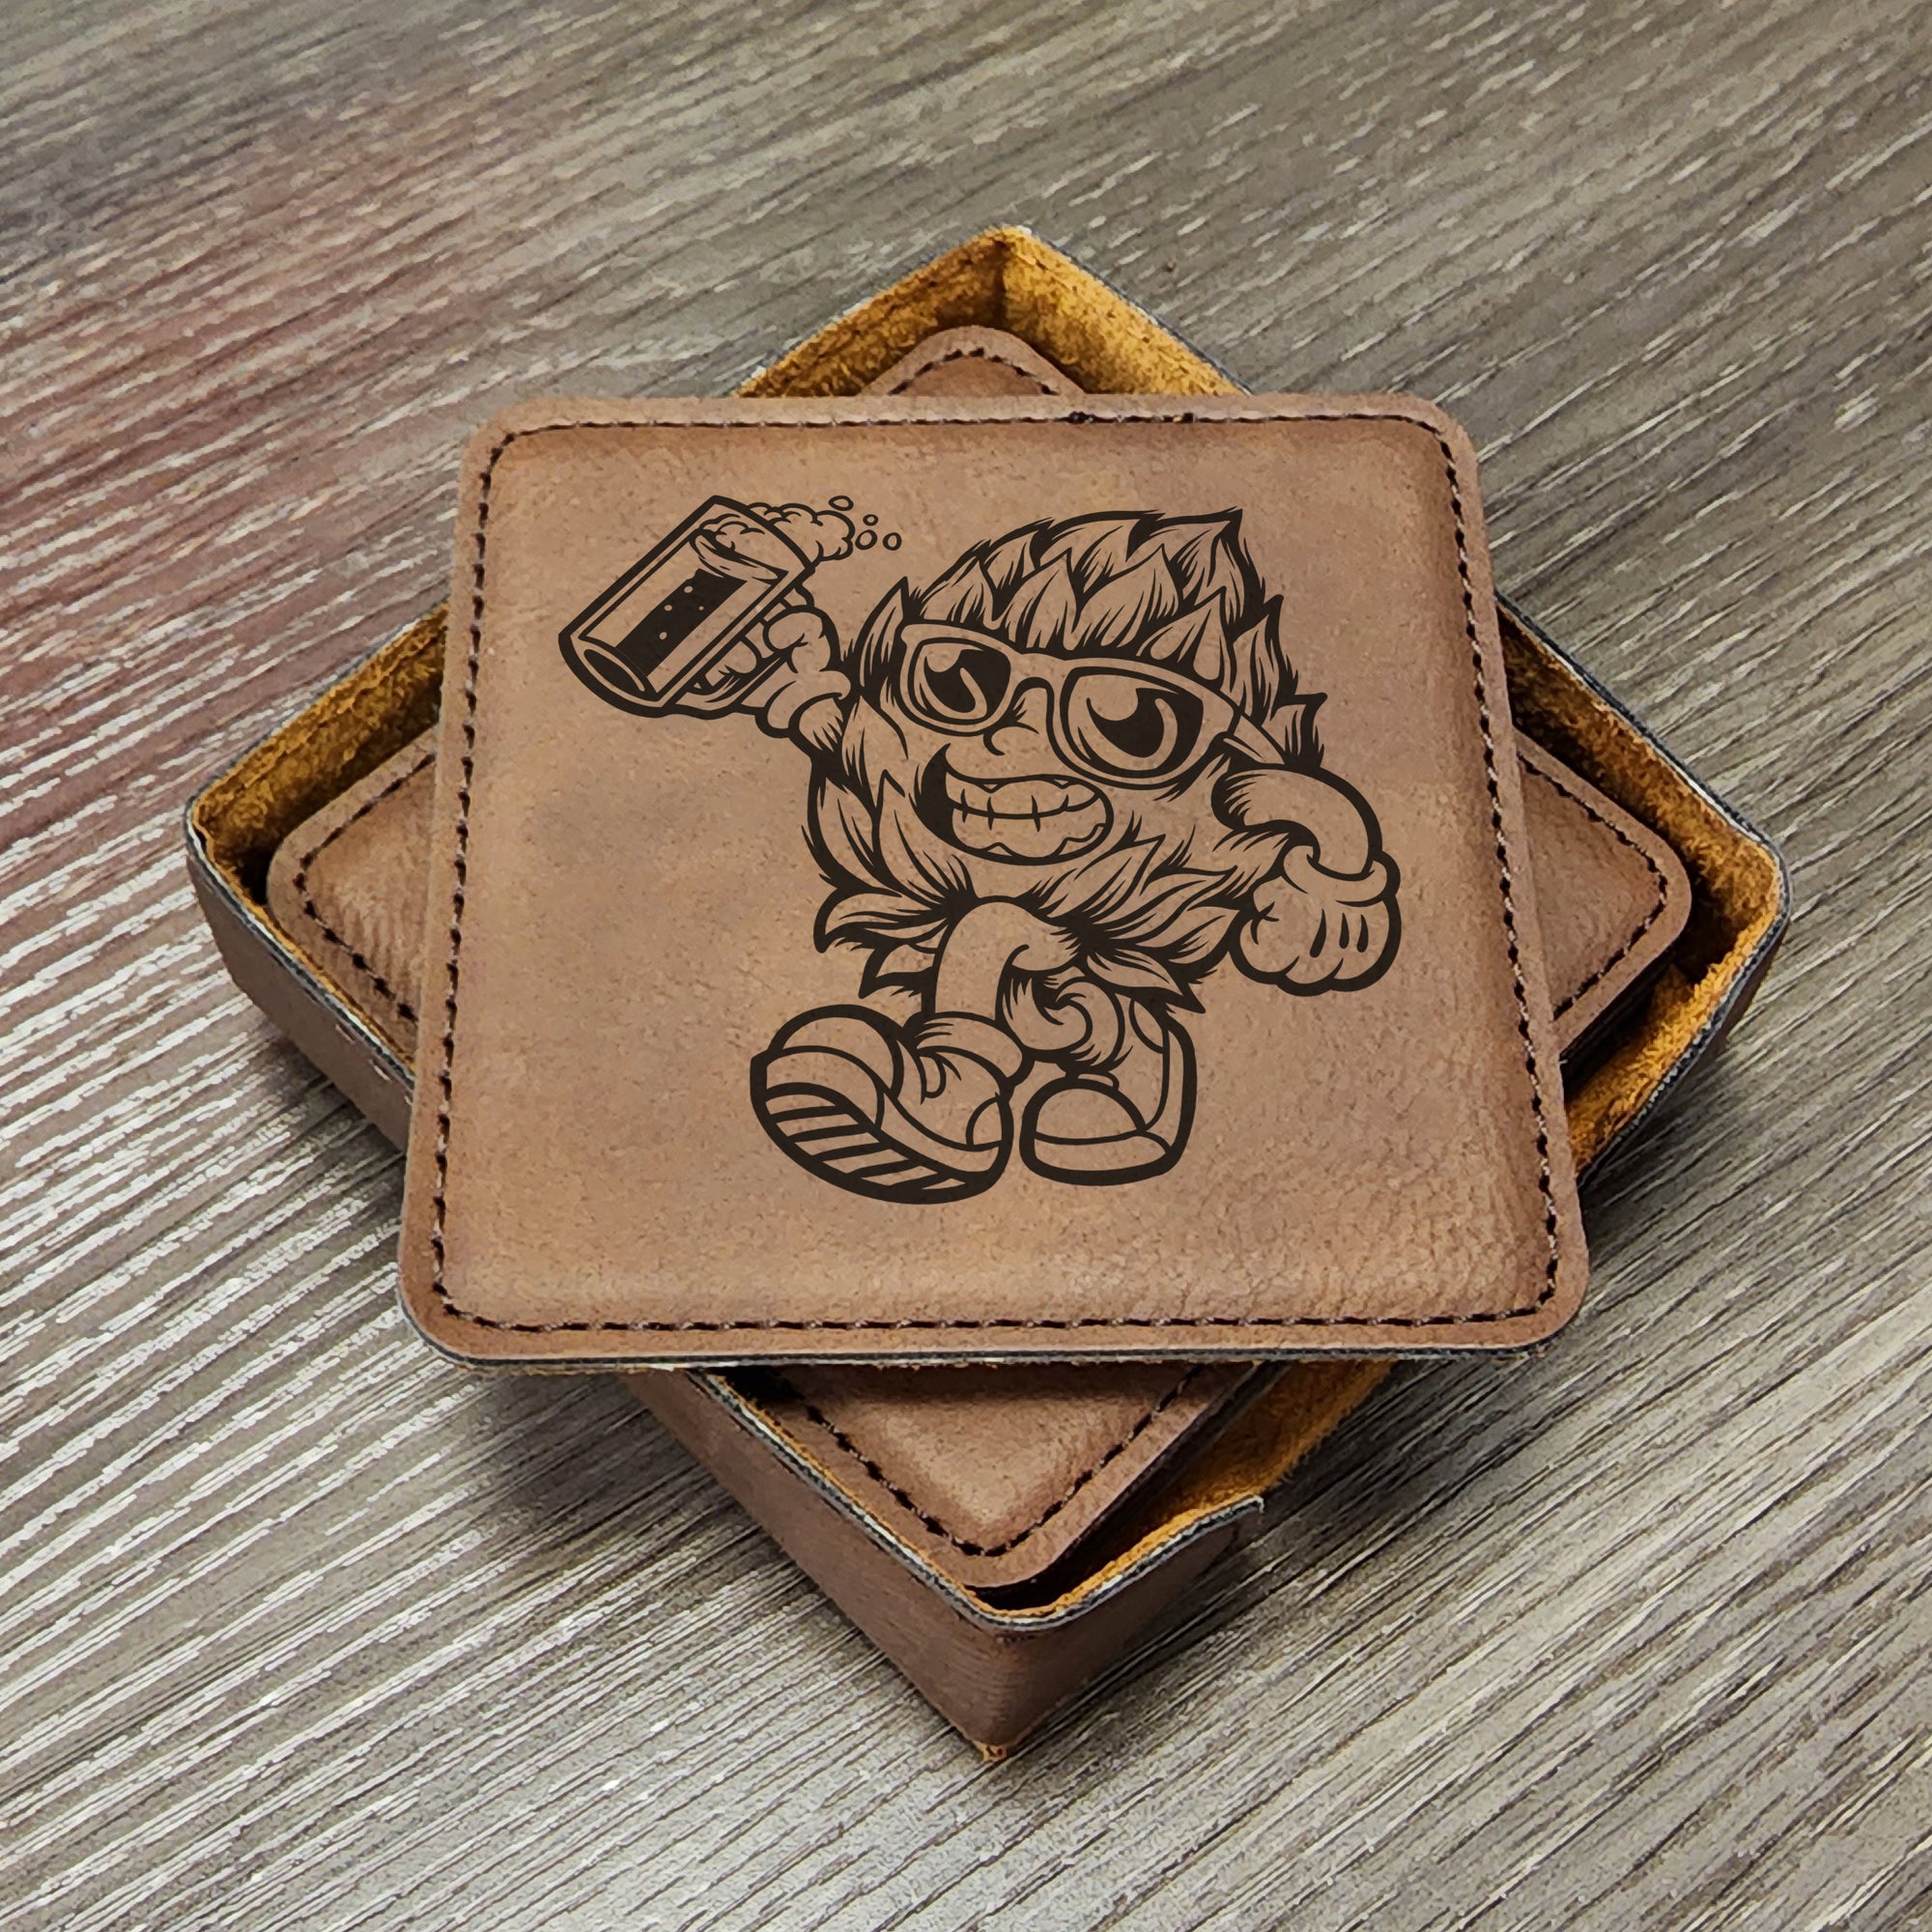 Good Time Hops Beer Drinker Mascot Leather Coasters, Beer Gifts, Man Cave Coaster, Brewery Coaster, Barware Coasters, Set of 6 With Holder